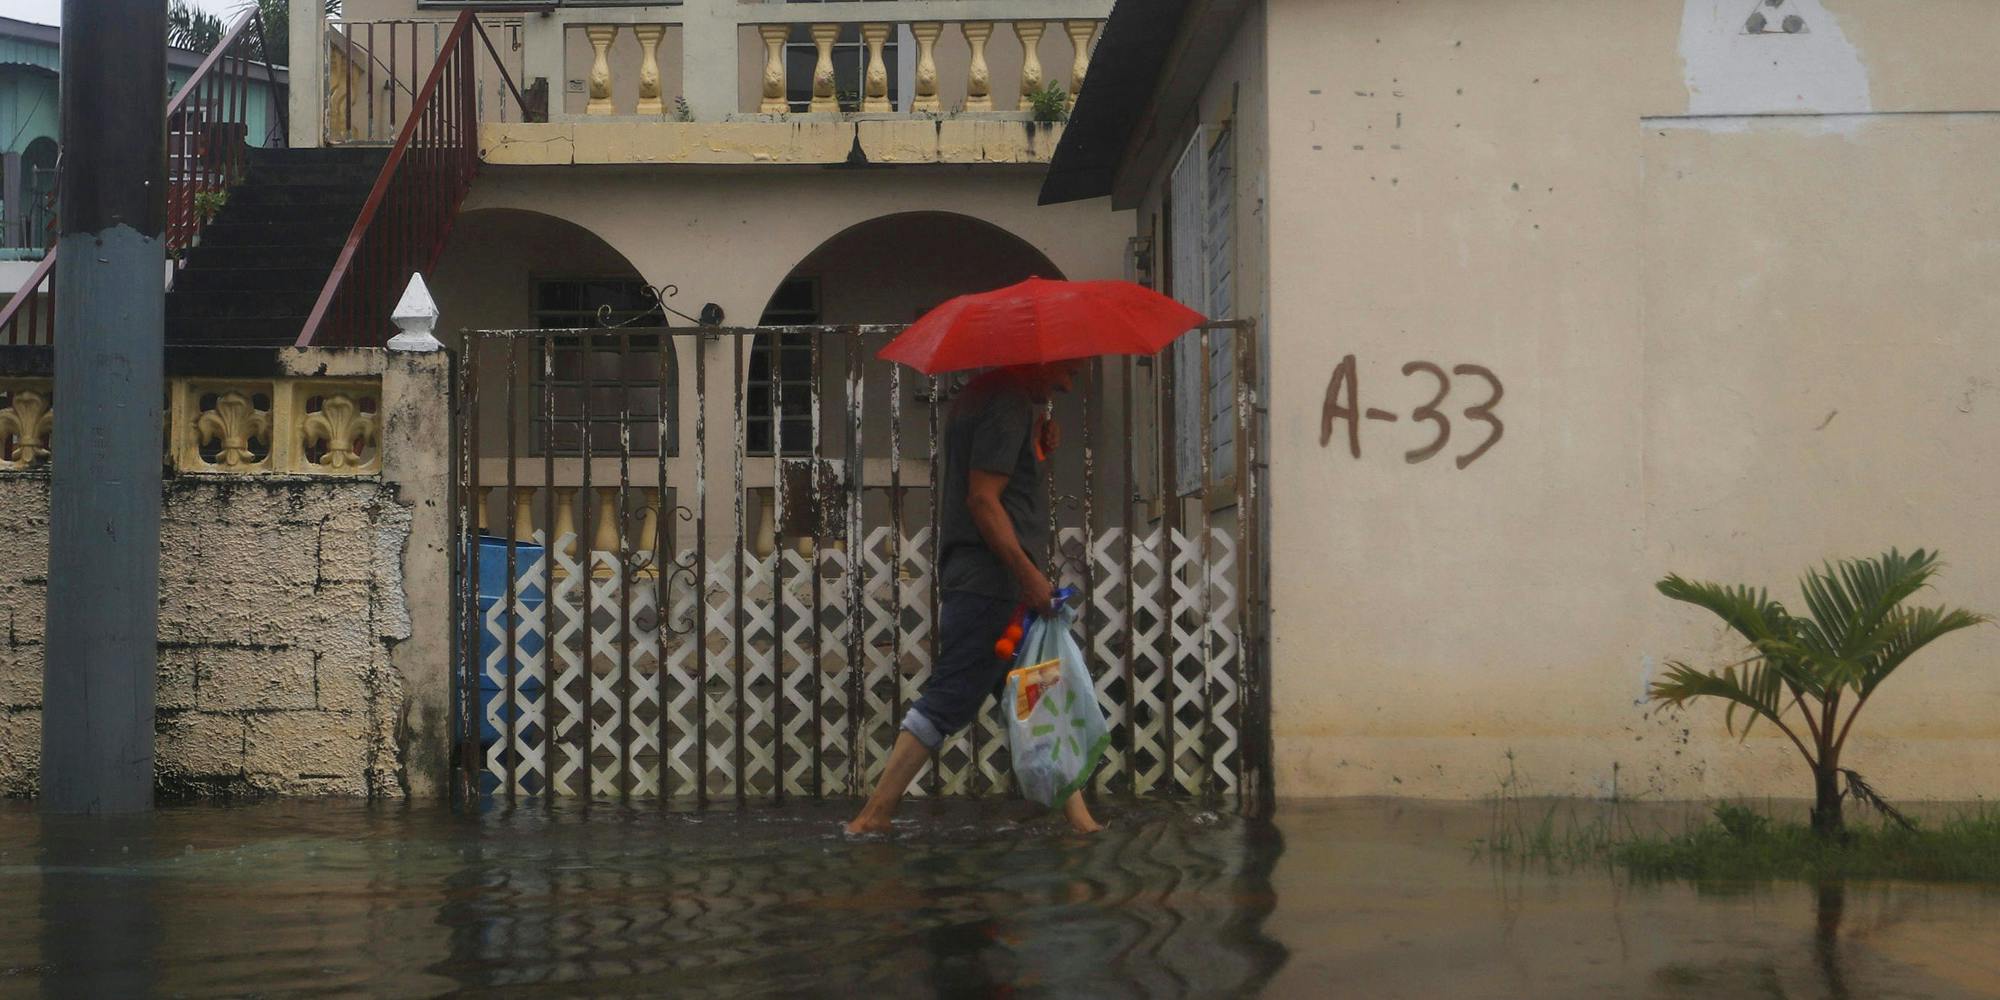 Aftermath of hurricane Fiona in Puerto Rico person walking in flooded street with umbrella